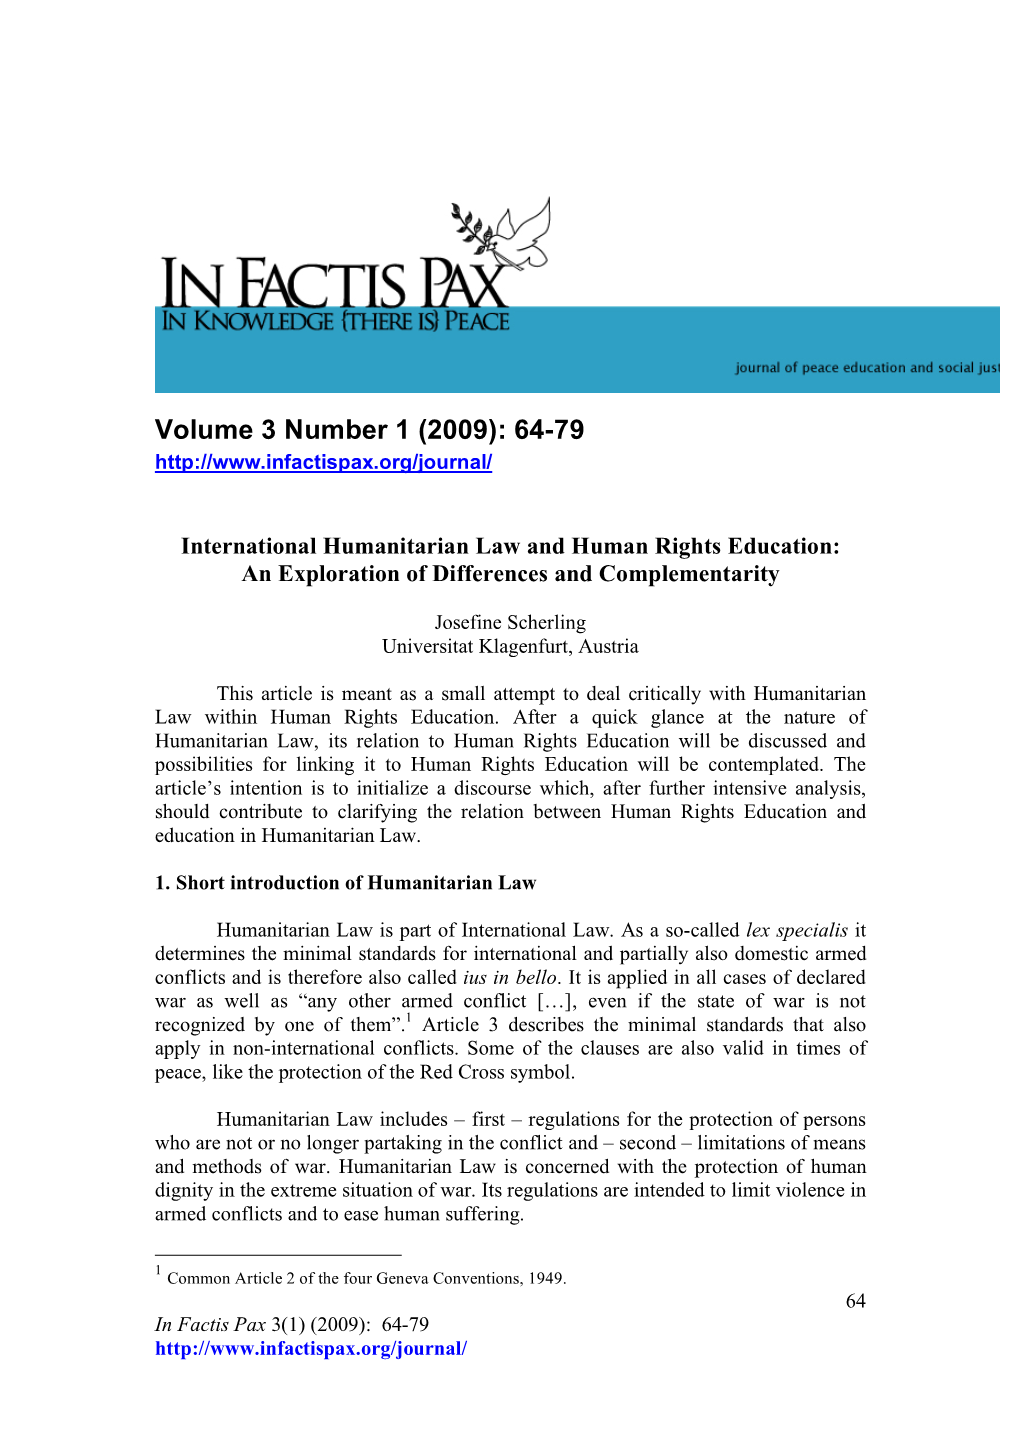 International Humanitarian Law and Human Rights Education: an Exploration of Differences and Complementarity